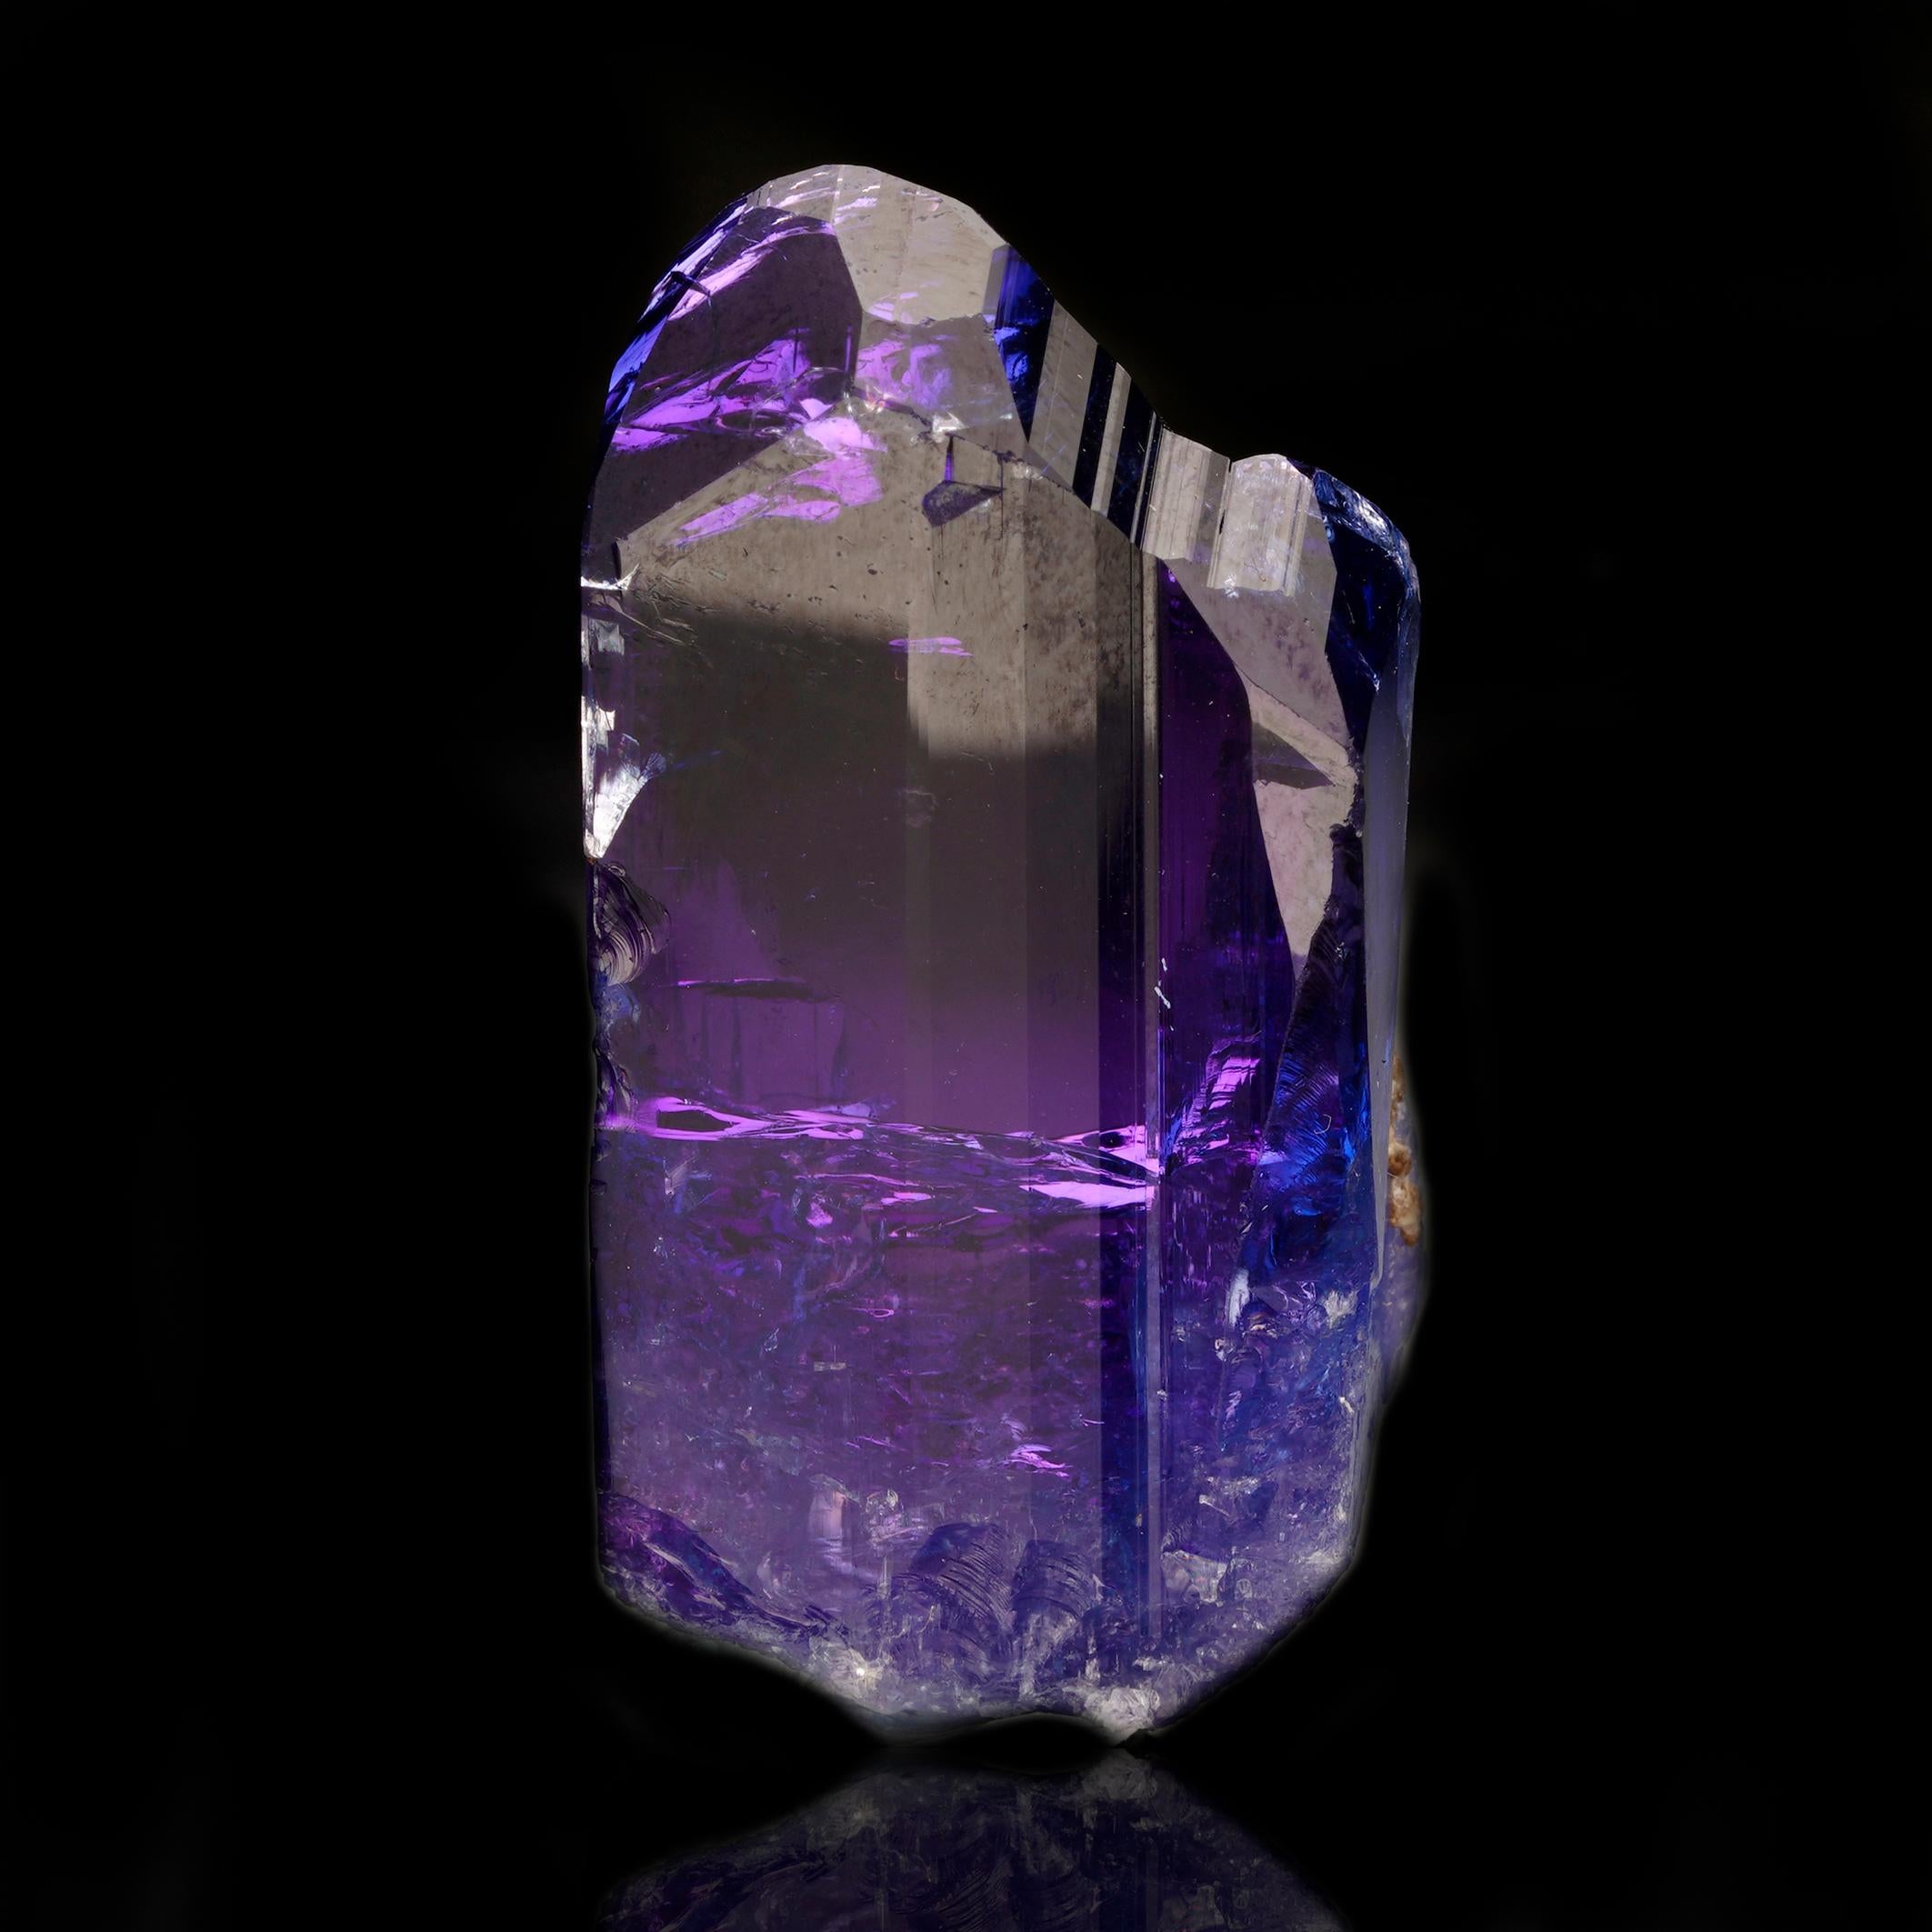 Discovered in 1967 and sourced in only one location on earth – Merelani Hills, Tanzania, near Mt. Kilimanjaro – enigmatic blue-violet or violet-blue tanzanite is one of the rarest and most prized gemstones on the planet. A translucent variety of